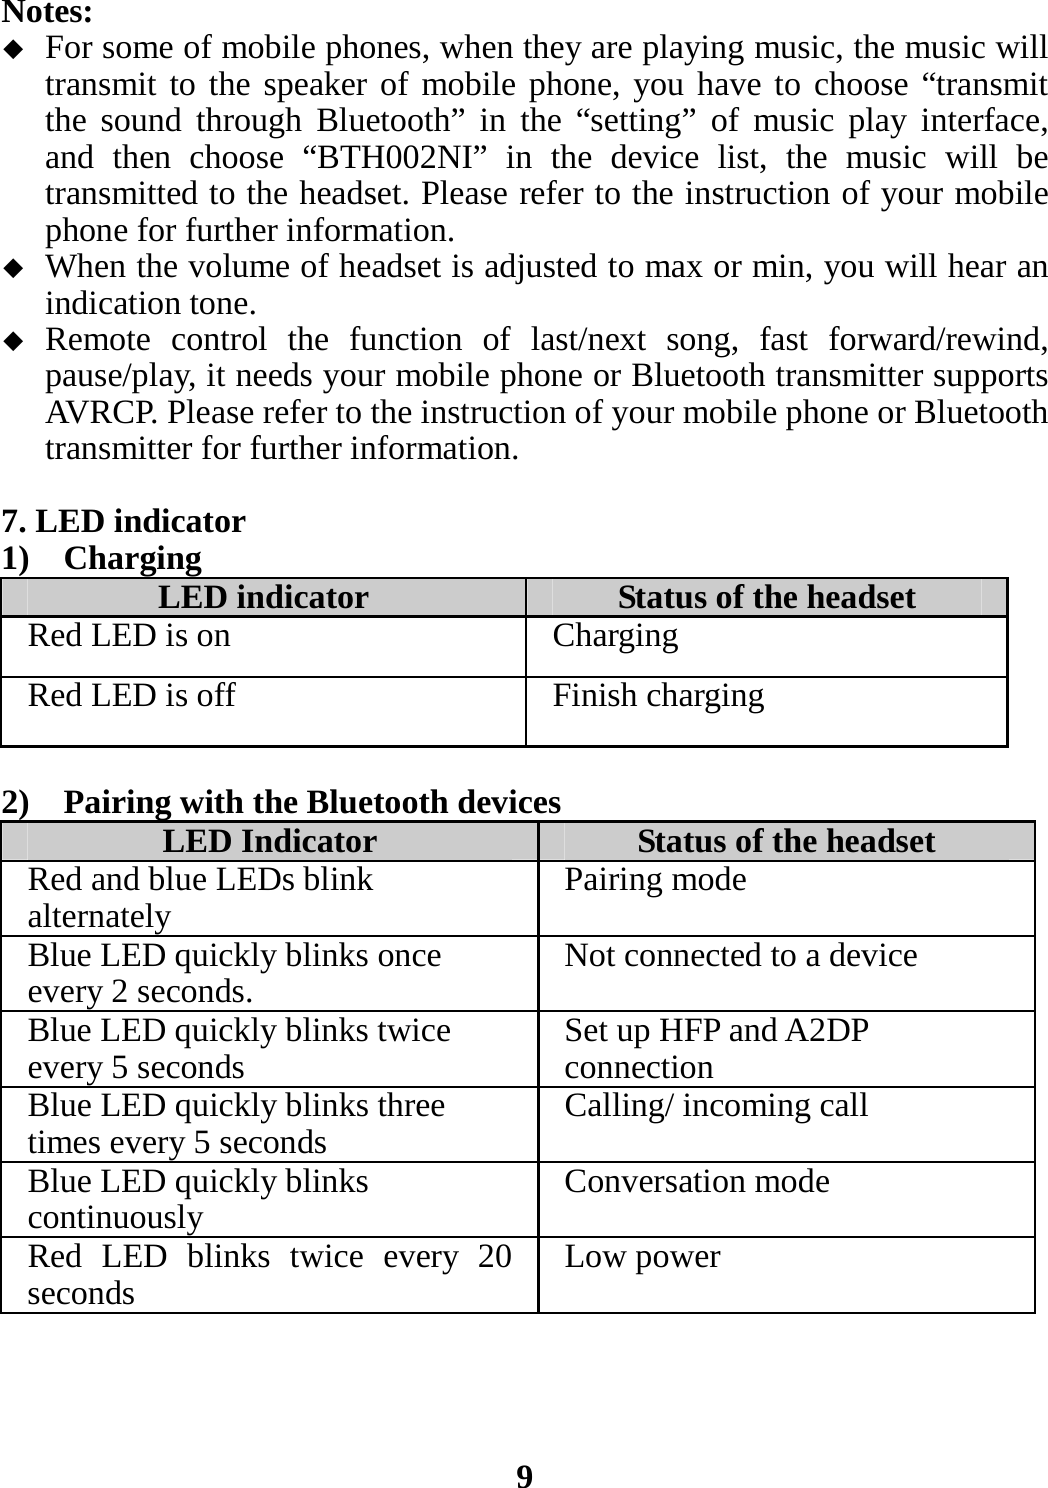 Notes:  For some of mobile phones, when they are playing music, the music will transmit to the speaker of mobile phone, you have to choose “transmit the sound through Bluetooth” in the “setting” of music play interface, and then choose “BTH002NI” in the device list, the music will be transmitted to the headset. Please refer to the instruction of your mobile phone for further information.  When the volume of headset is adjusted to max or min, you will hear an indication tone.  Remote control the function of last/next song, fast forward/rewind, pause/play, it needs your mobile phone or Bluetooth transmitter supports AVRCP. Please refer to the instruction of your mobile phone or Bluetooth transmitter for further information.  7. LED indicator 1)  Charging  LED indicator  Status of the headsetRed LED is on  Charging Red LED is off  Finish charging  2)    Pairing with the Bluetooth devices   LED Indicator  Status of the headsetRed and blue LEDs blink alternately Pairing modeBlue LED quickly blinks onceevery 2 seconds. Not connected to a deviceBlue LED quickly blinks twice  every 5 seconds Set up HFP and A2DP connectionBlue LED quickly blinks three times every 5 seconds  Calling/ incoming call Blue LED quickly blinks continuously Conversation mode Red LED blinks twice every 20 seconds  Low power    9 